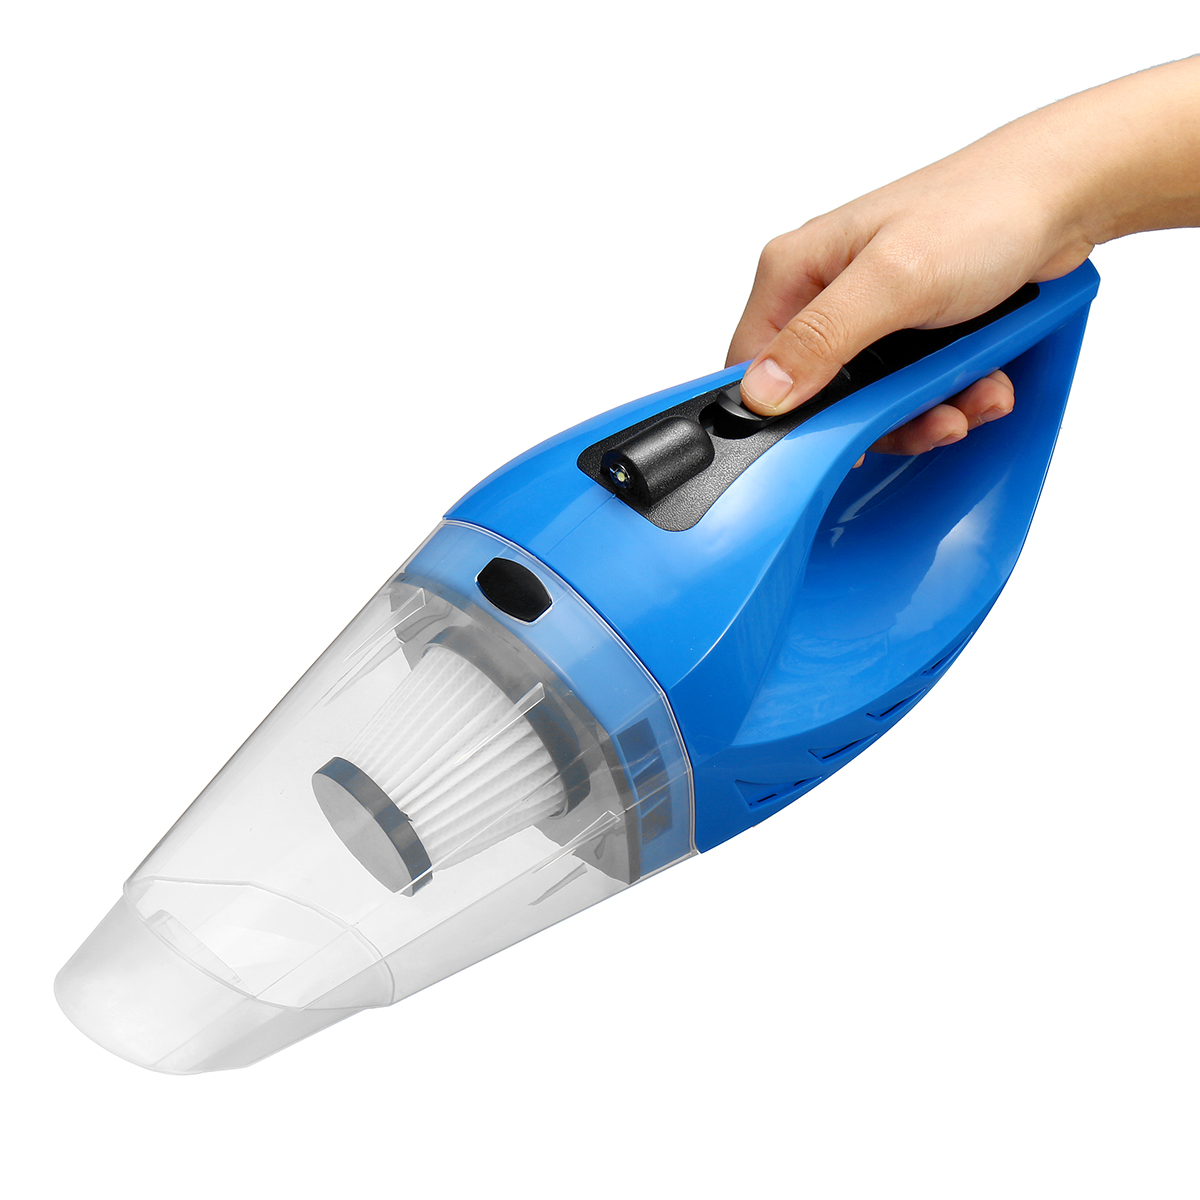 12V-150W-Cordless-Handheld-Vacuum-Cleaner-Strong-Suction-Dust-Busters-Wet--Dry-1423164-7